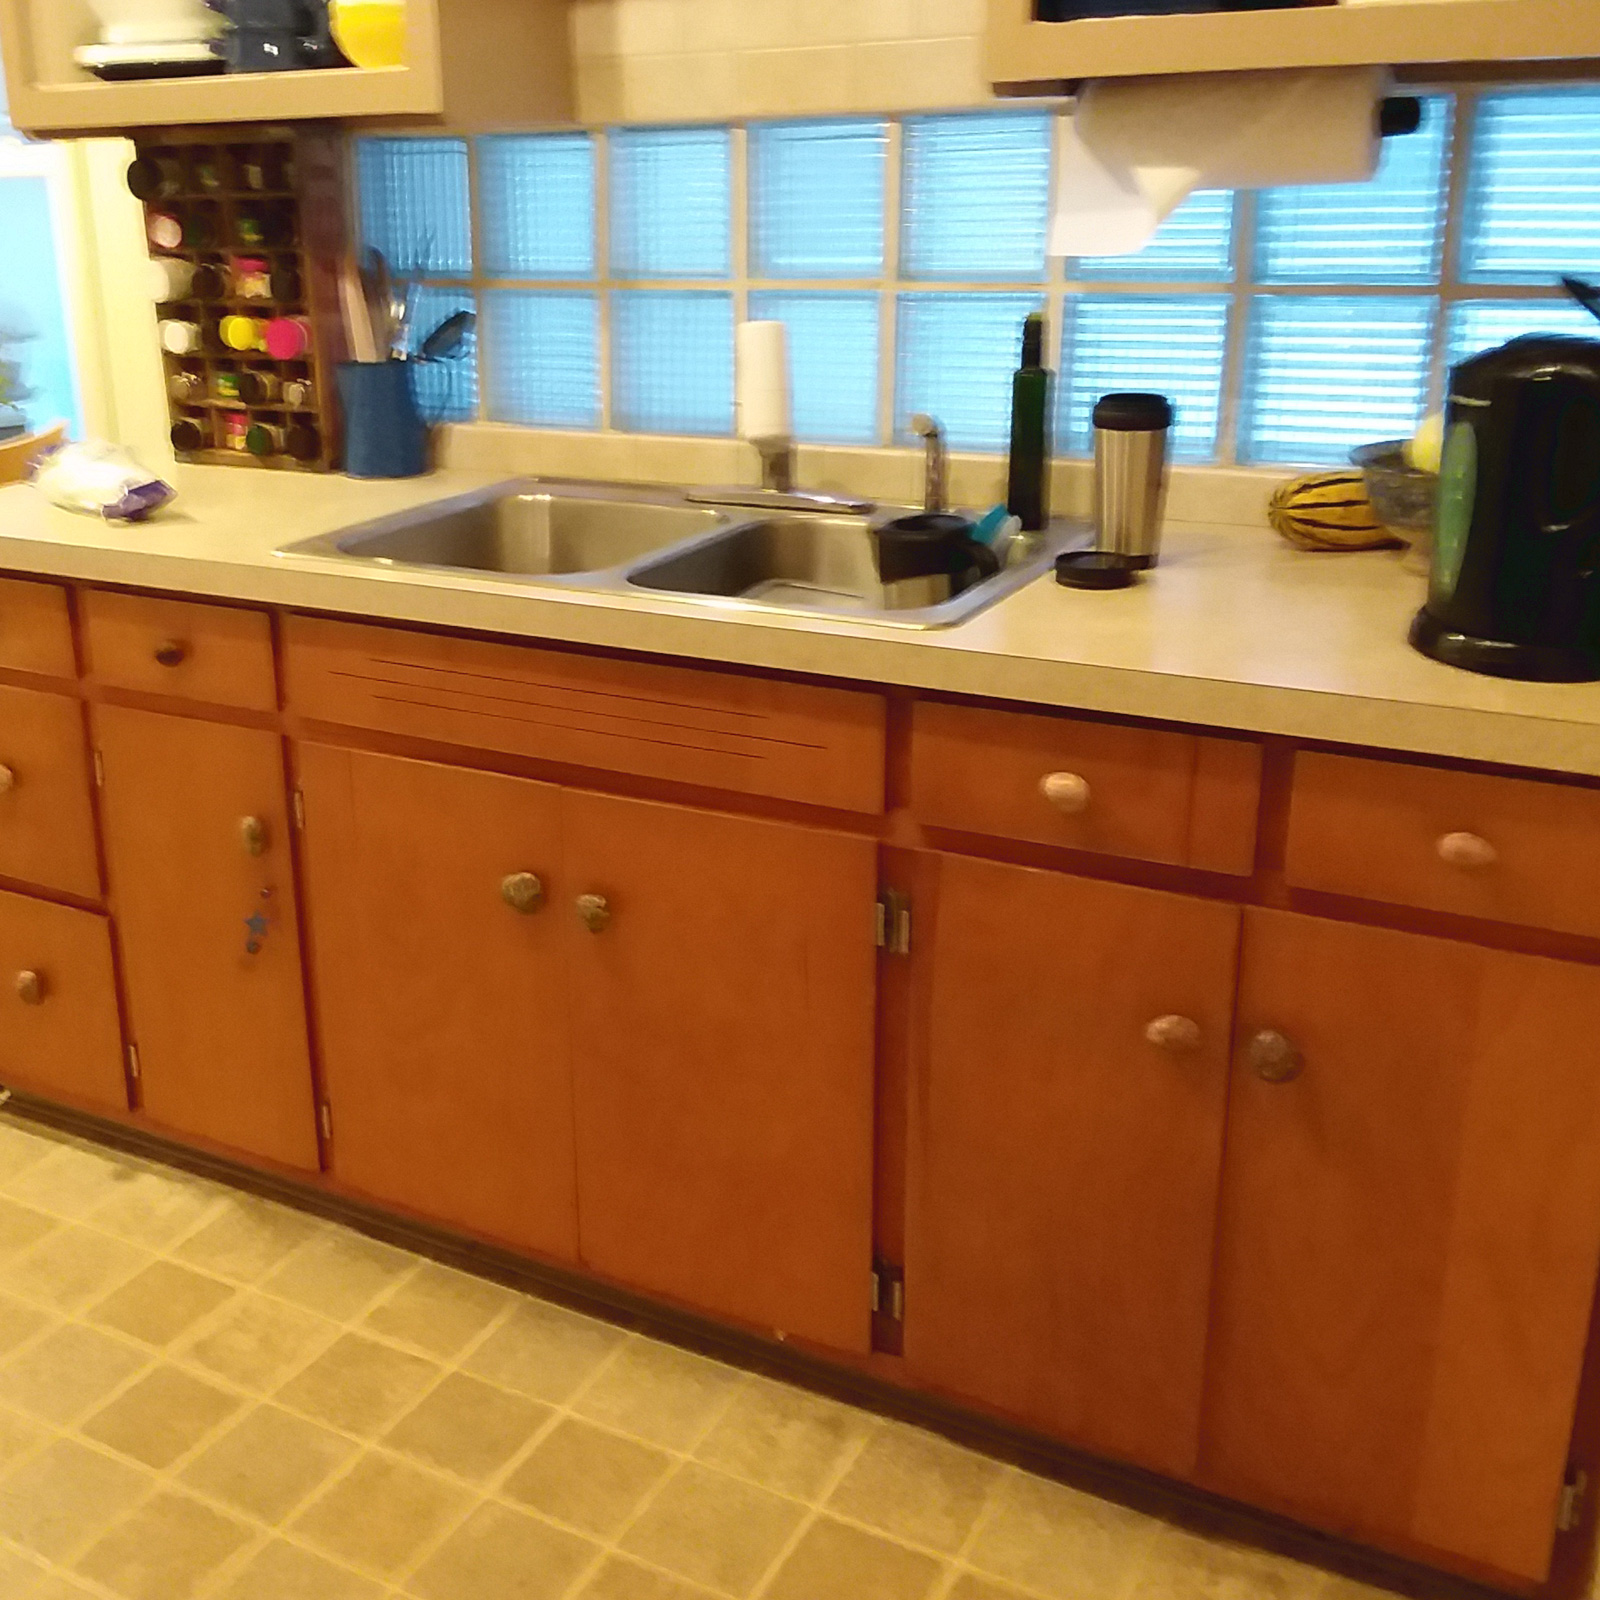 Entry 67 - These outdated cabinets are in poor shape and the kitchen needs an updated look